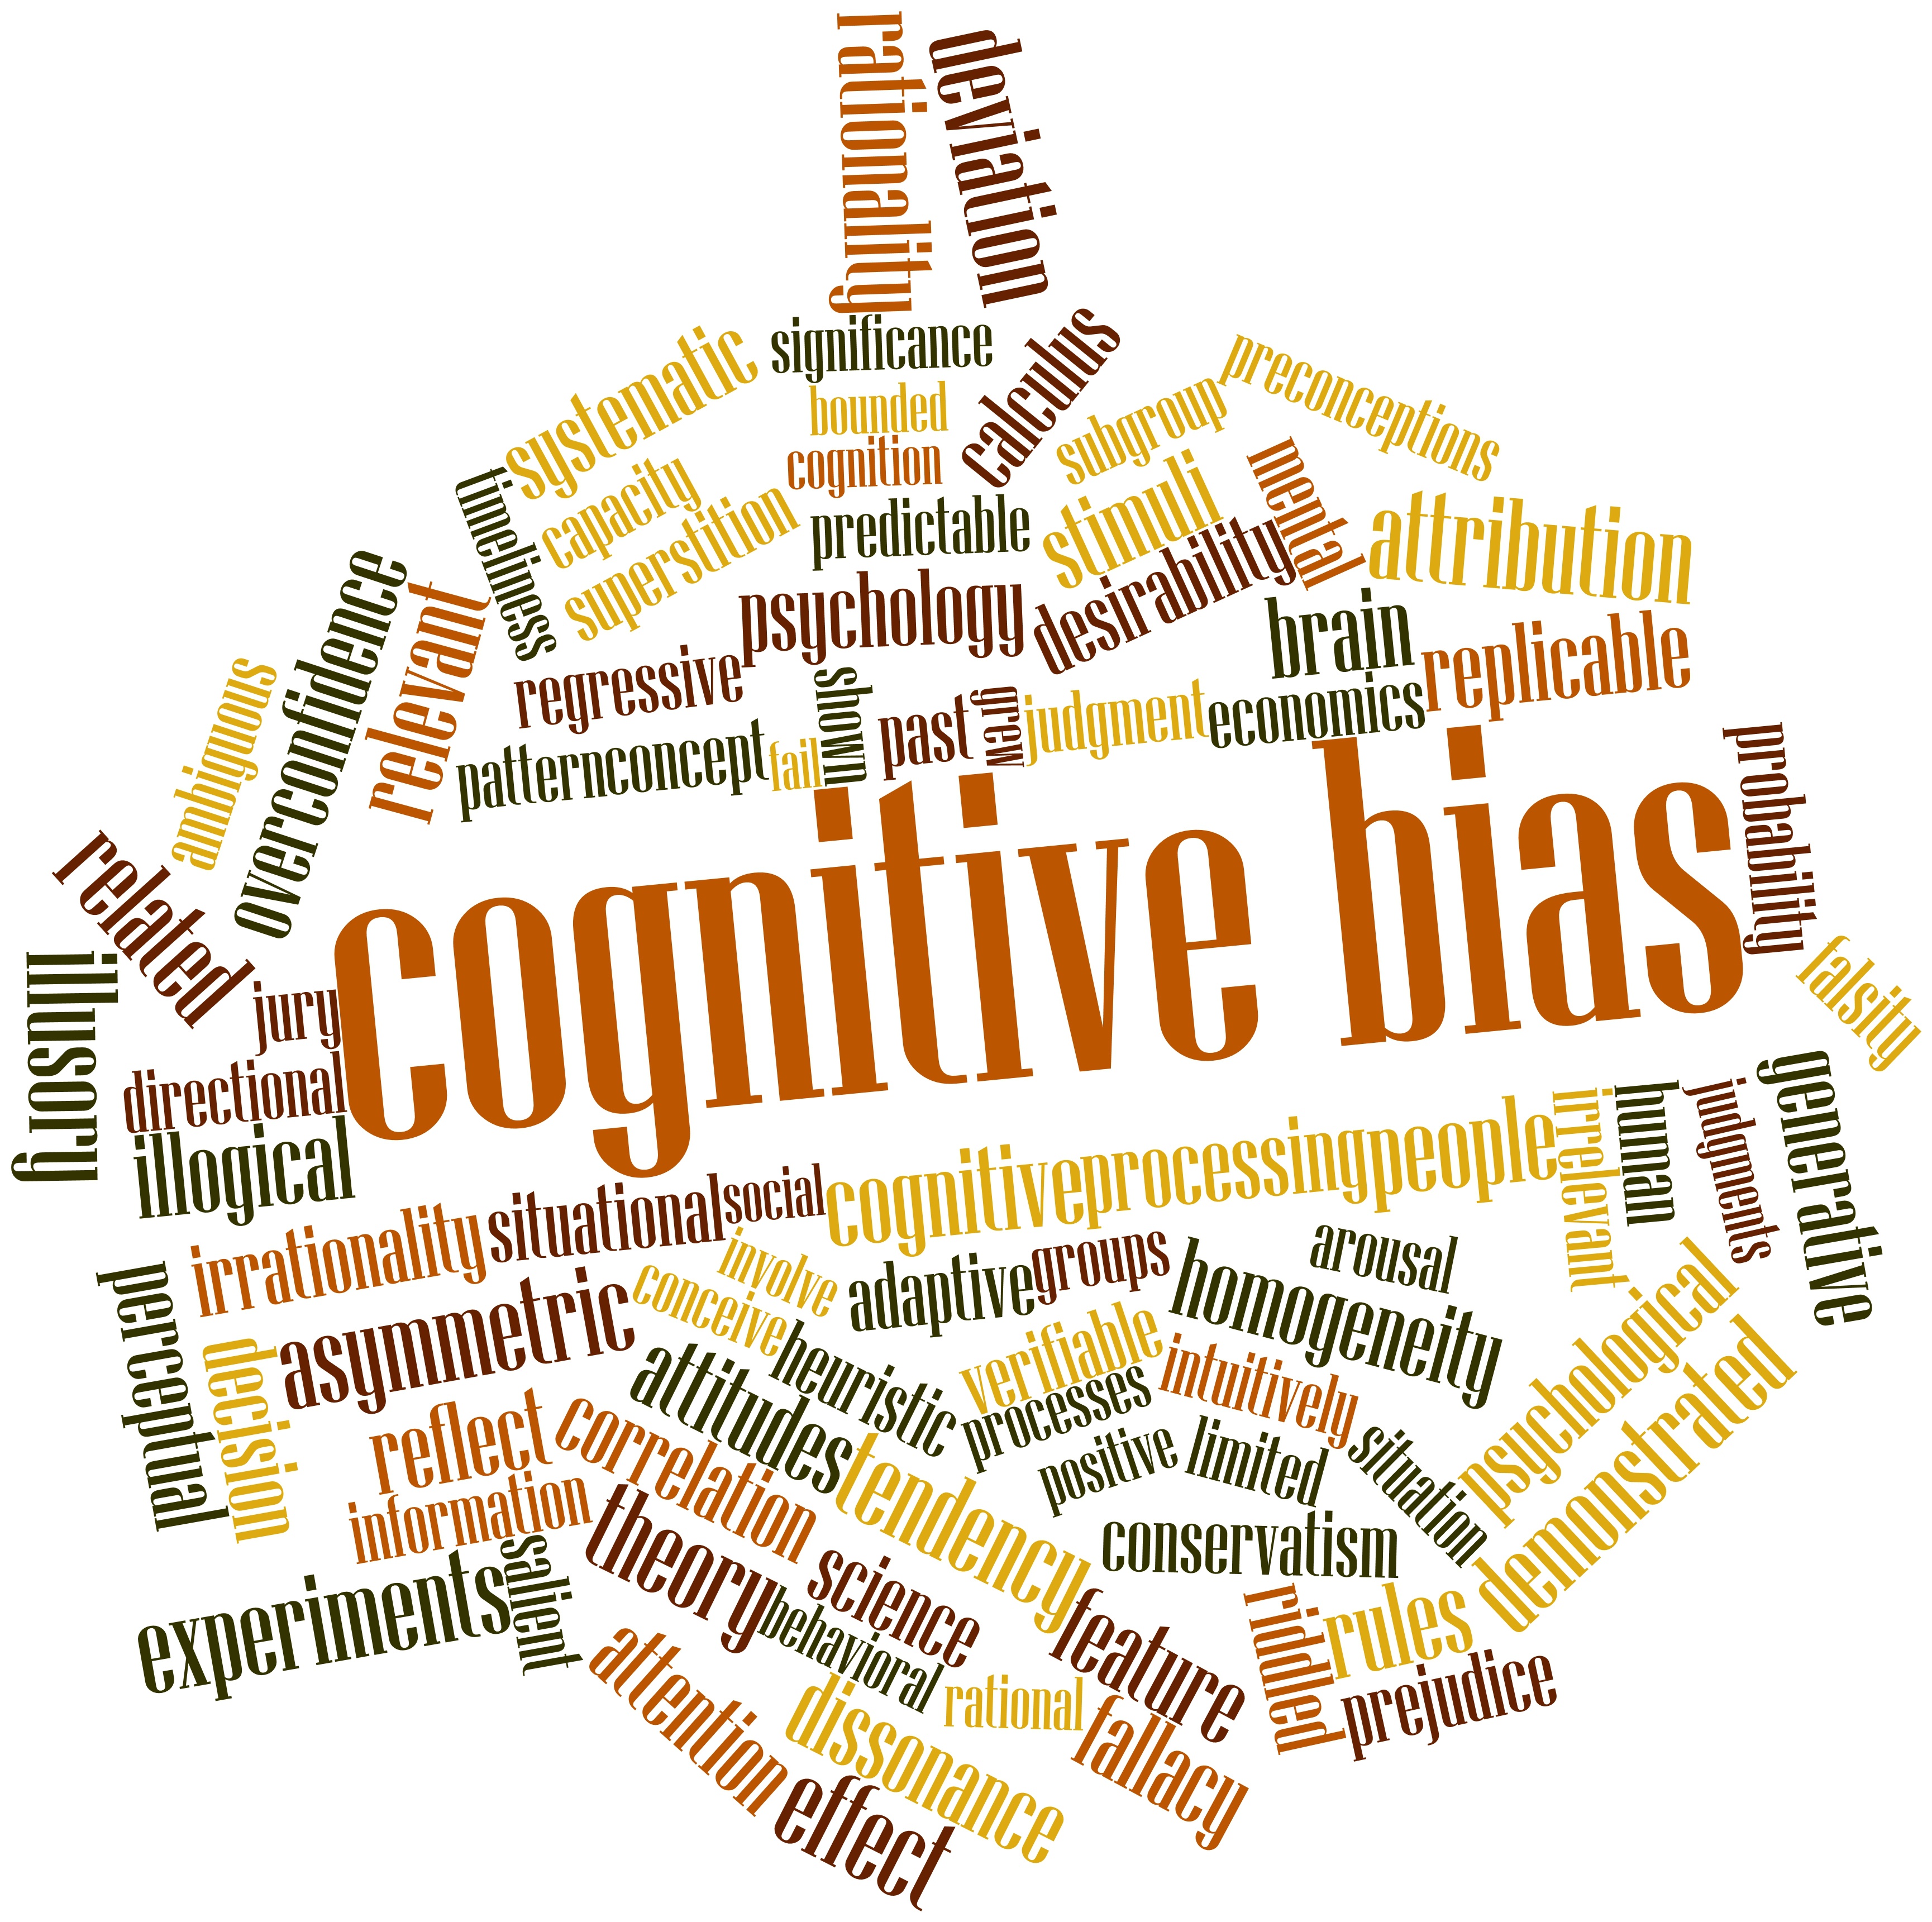 Abstract word cloud for Cognitive bias with related tags and terms